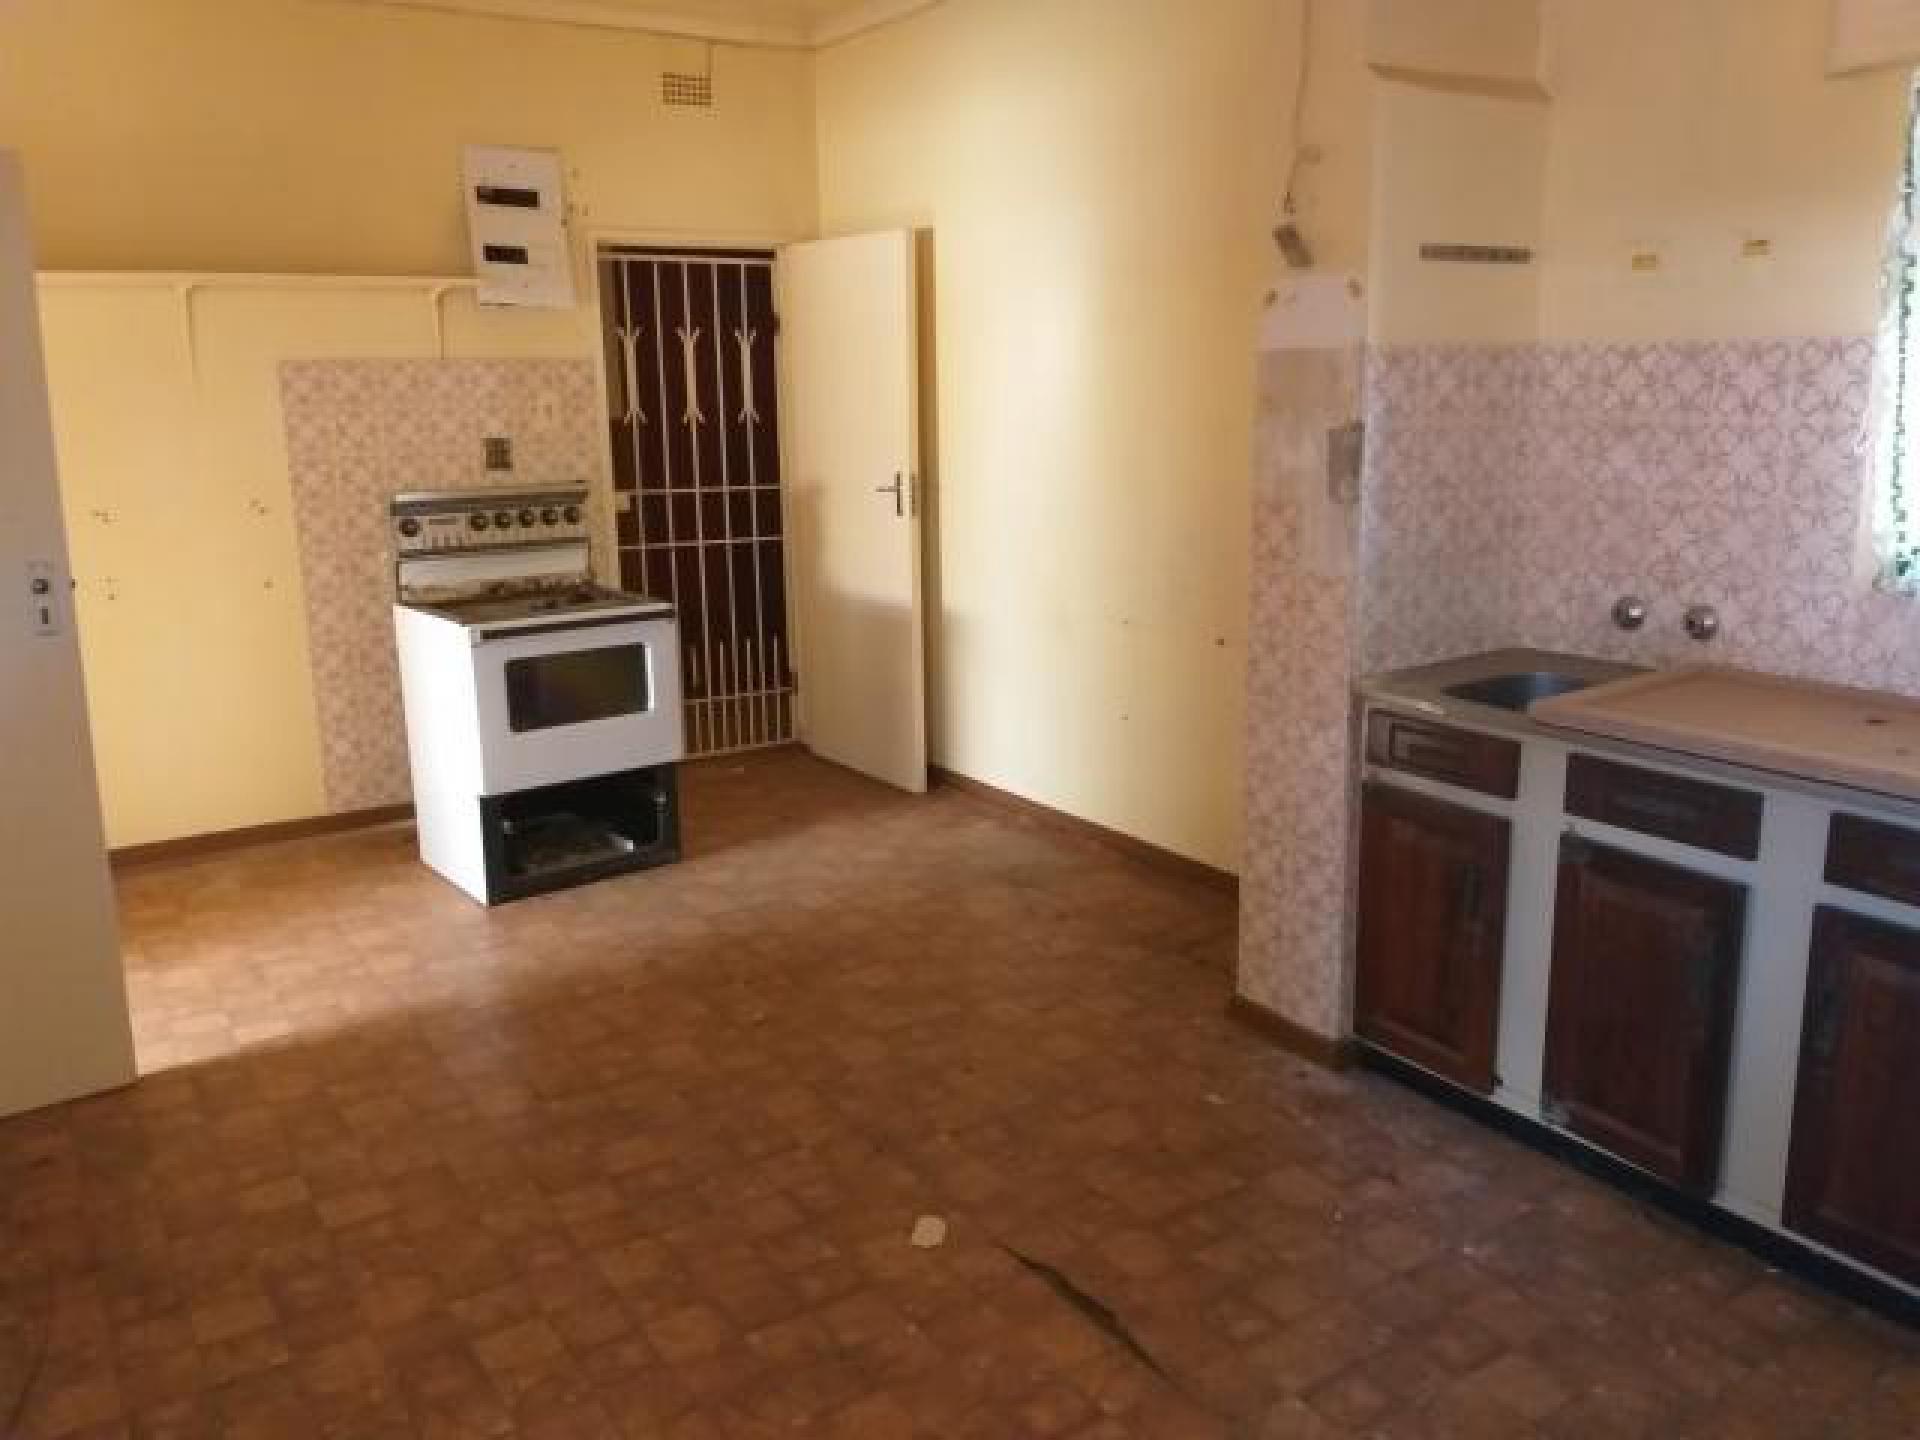 Kitchen of property in Dominion Reefs